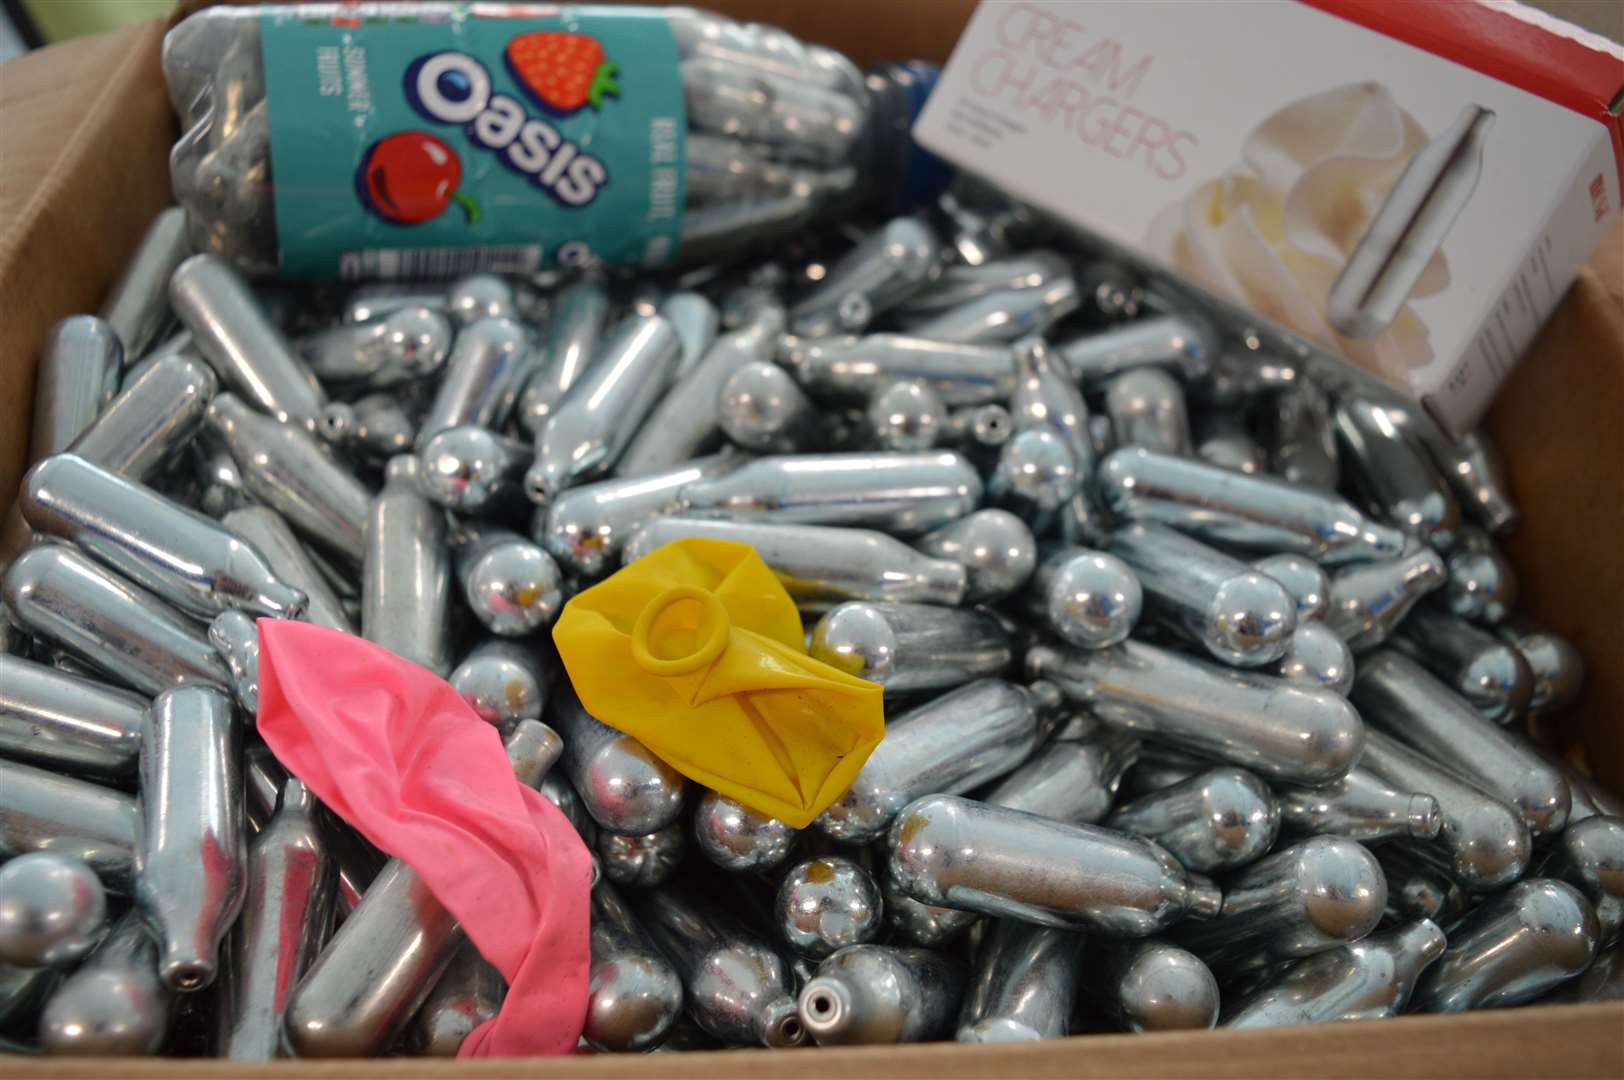 Nitrous oxide is ingested using small silver canisters and balloons